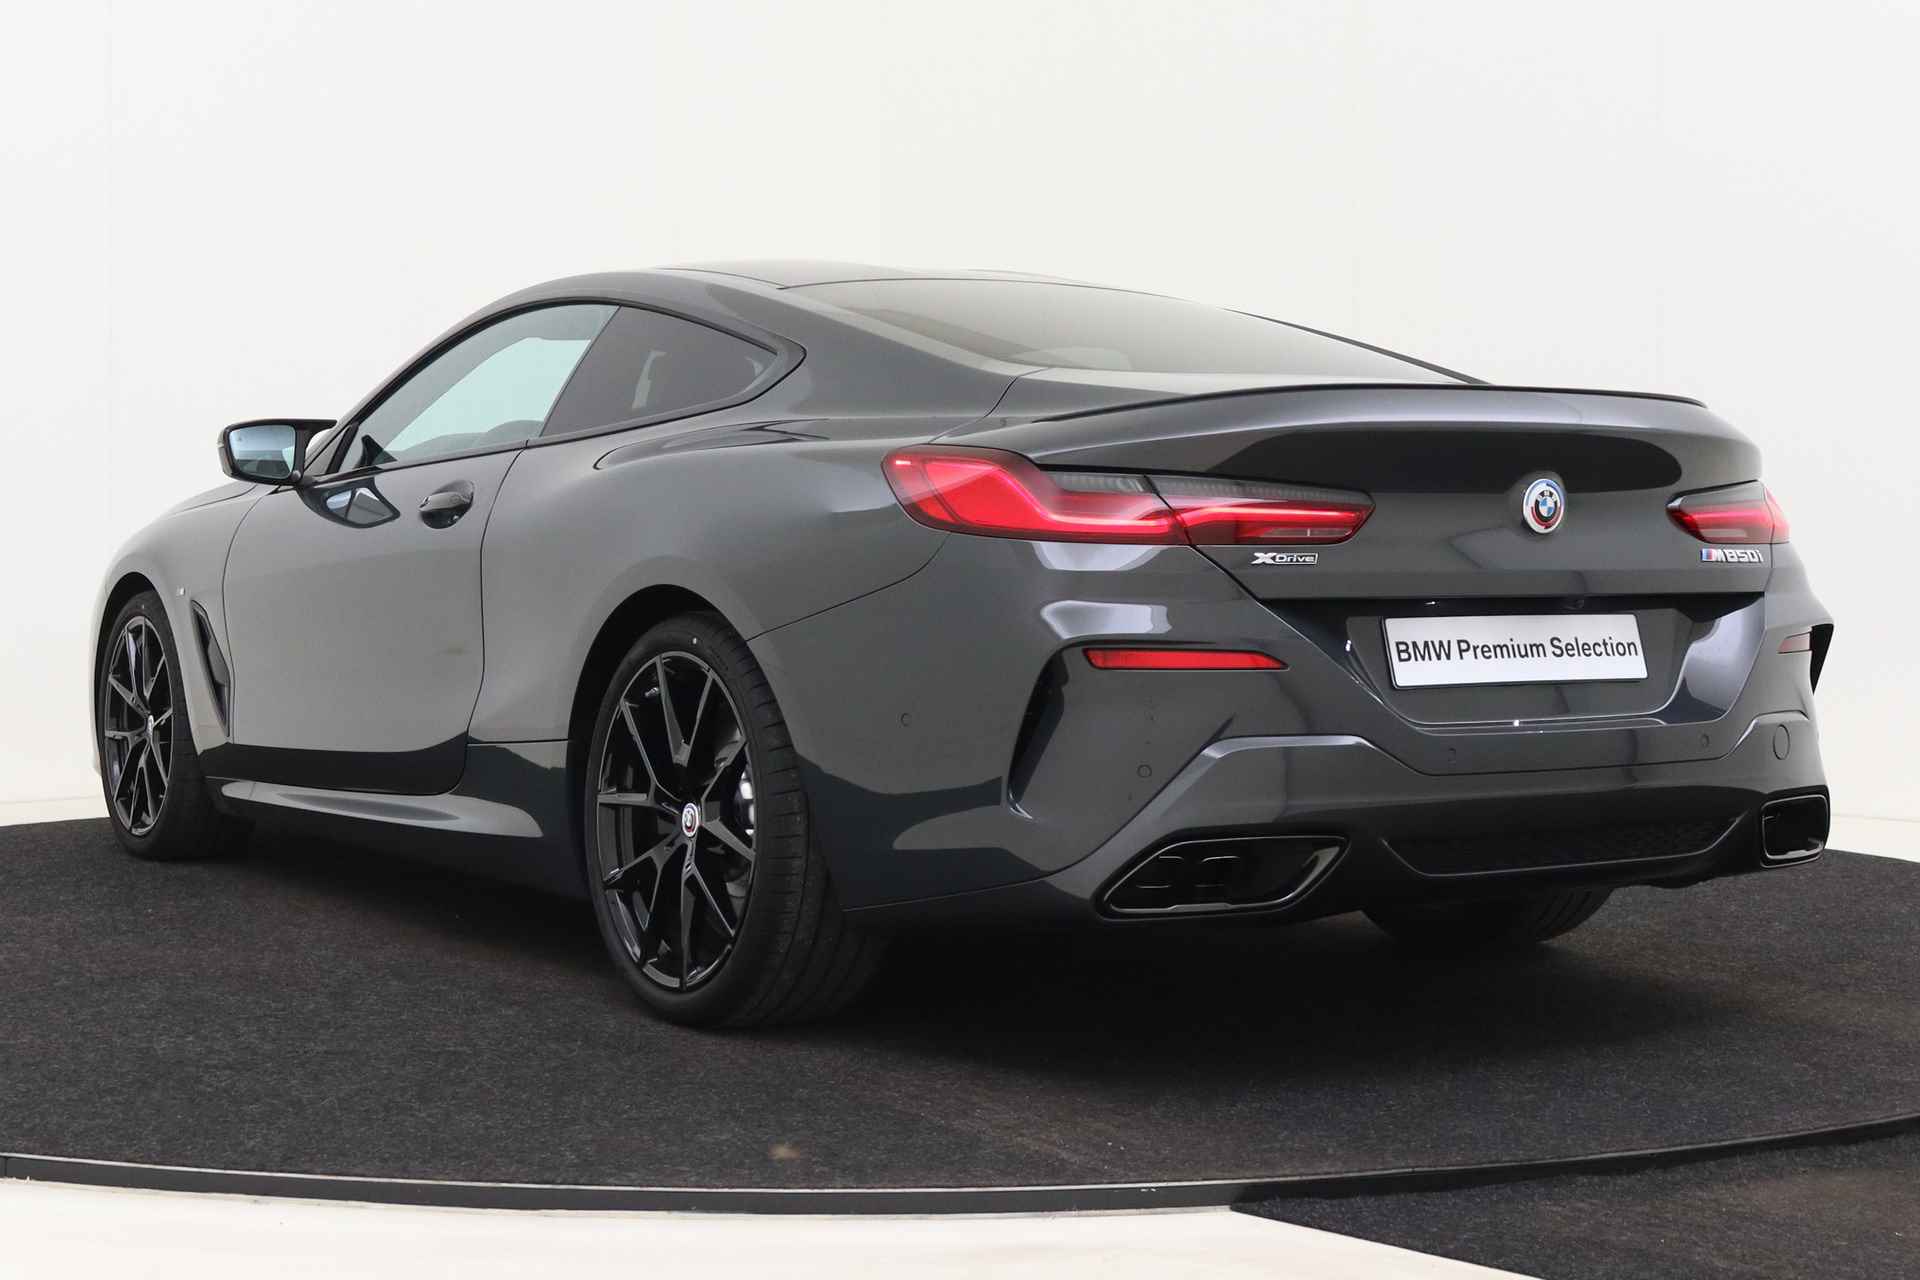 BMW 8 Serie M850i xDrive High Executive M Sport / M Carbondak / Laserlight / Bowers & Wilkins / 50 Jahre M Edition / Driving Assistant Professional / Soft Close - 16/81